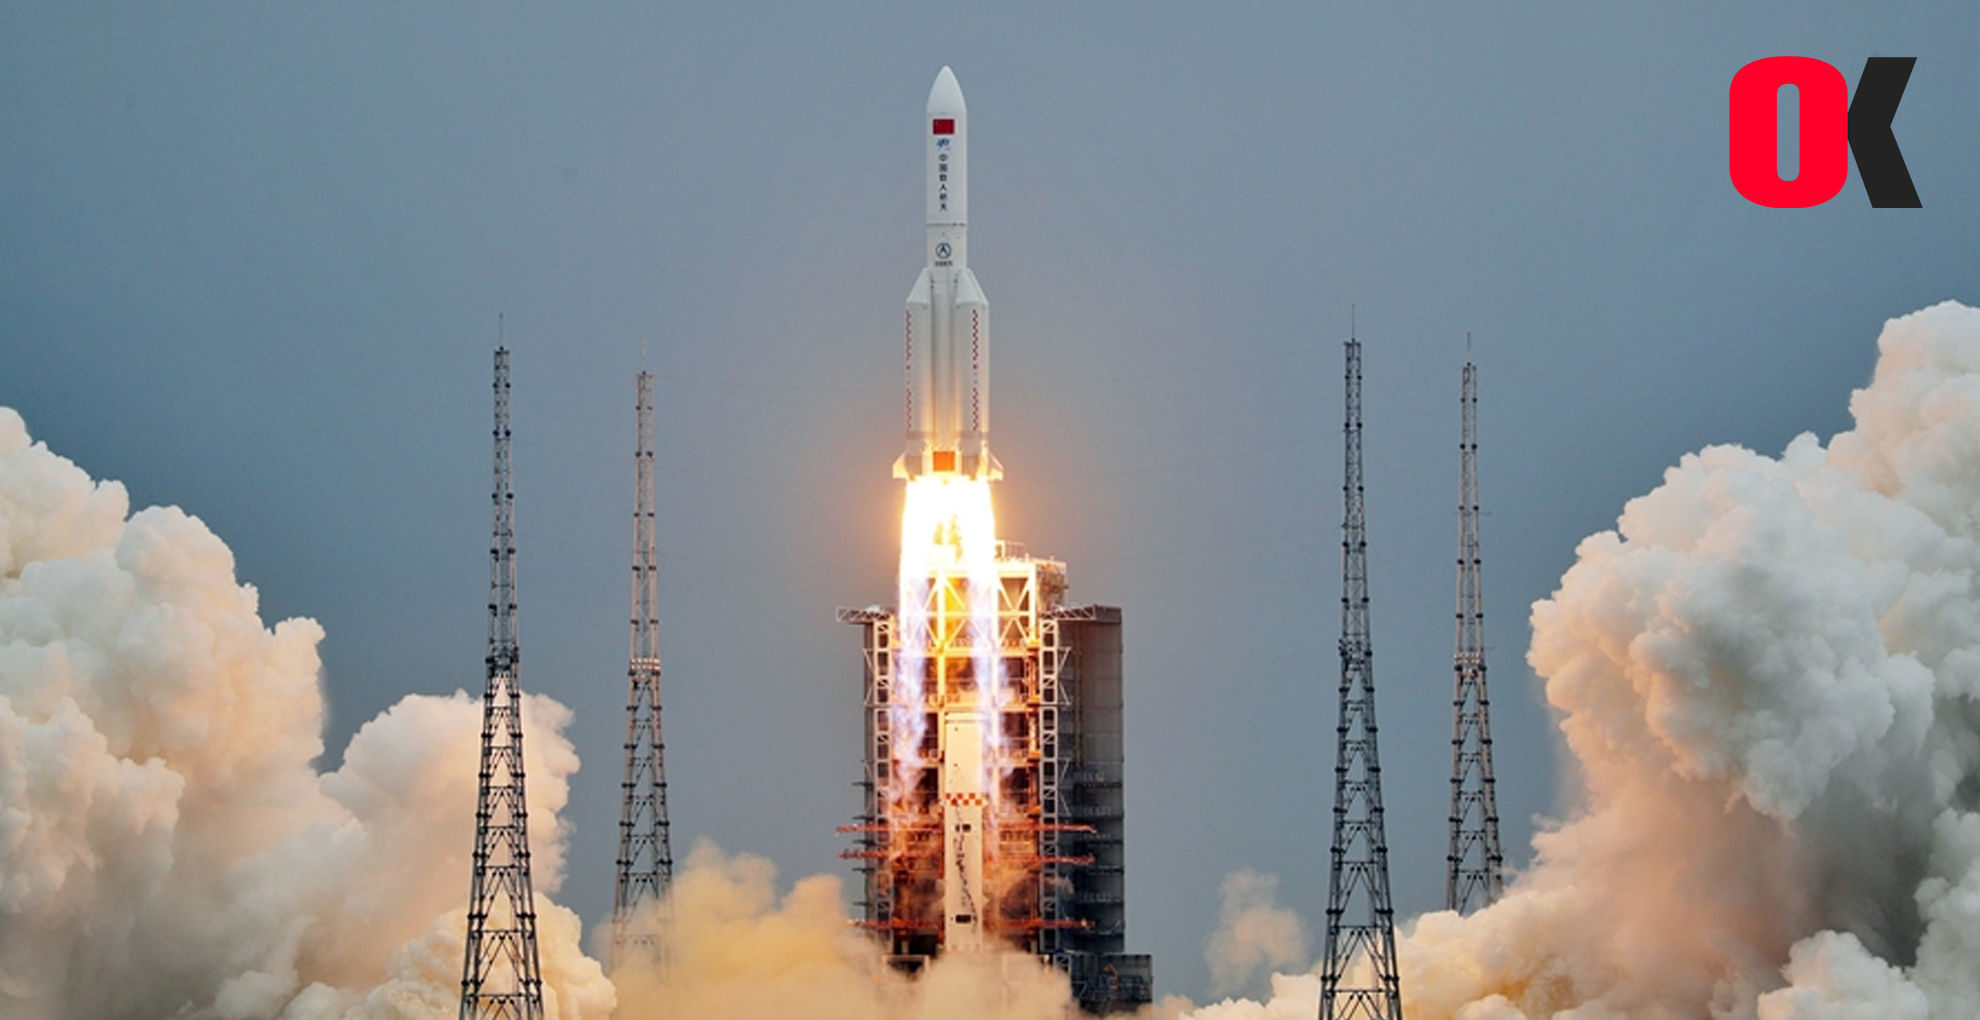 China launched the first part of its large space station